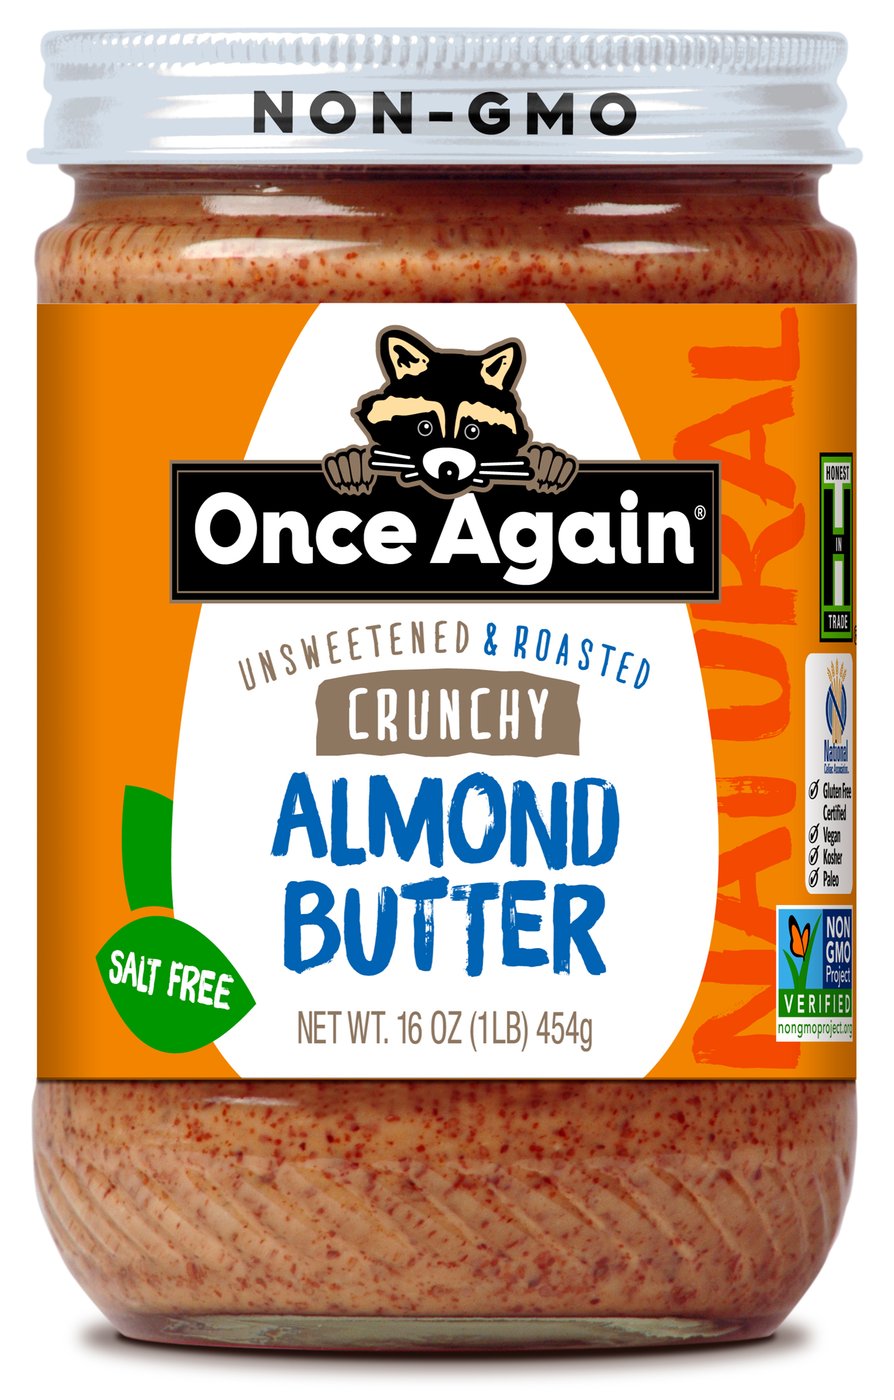 Almond Butter (Roasted, Crunchy) image zoom